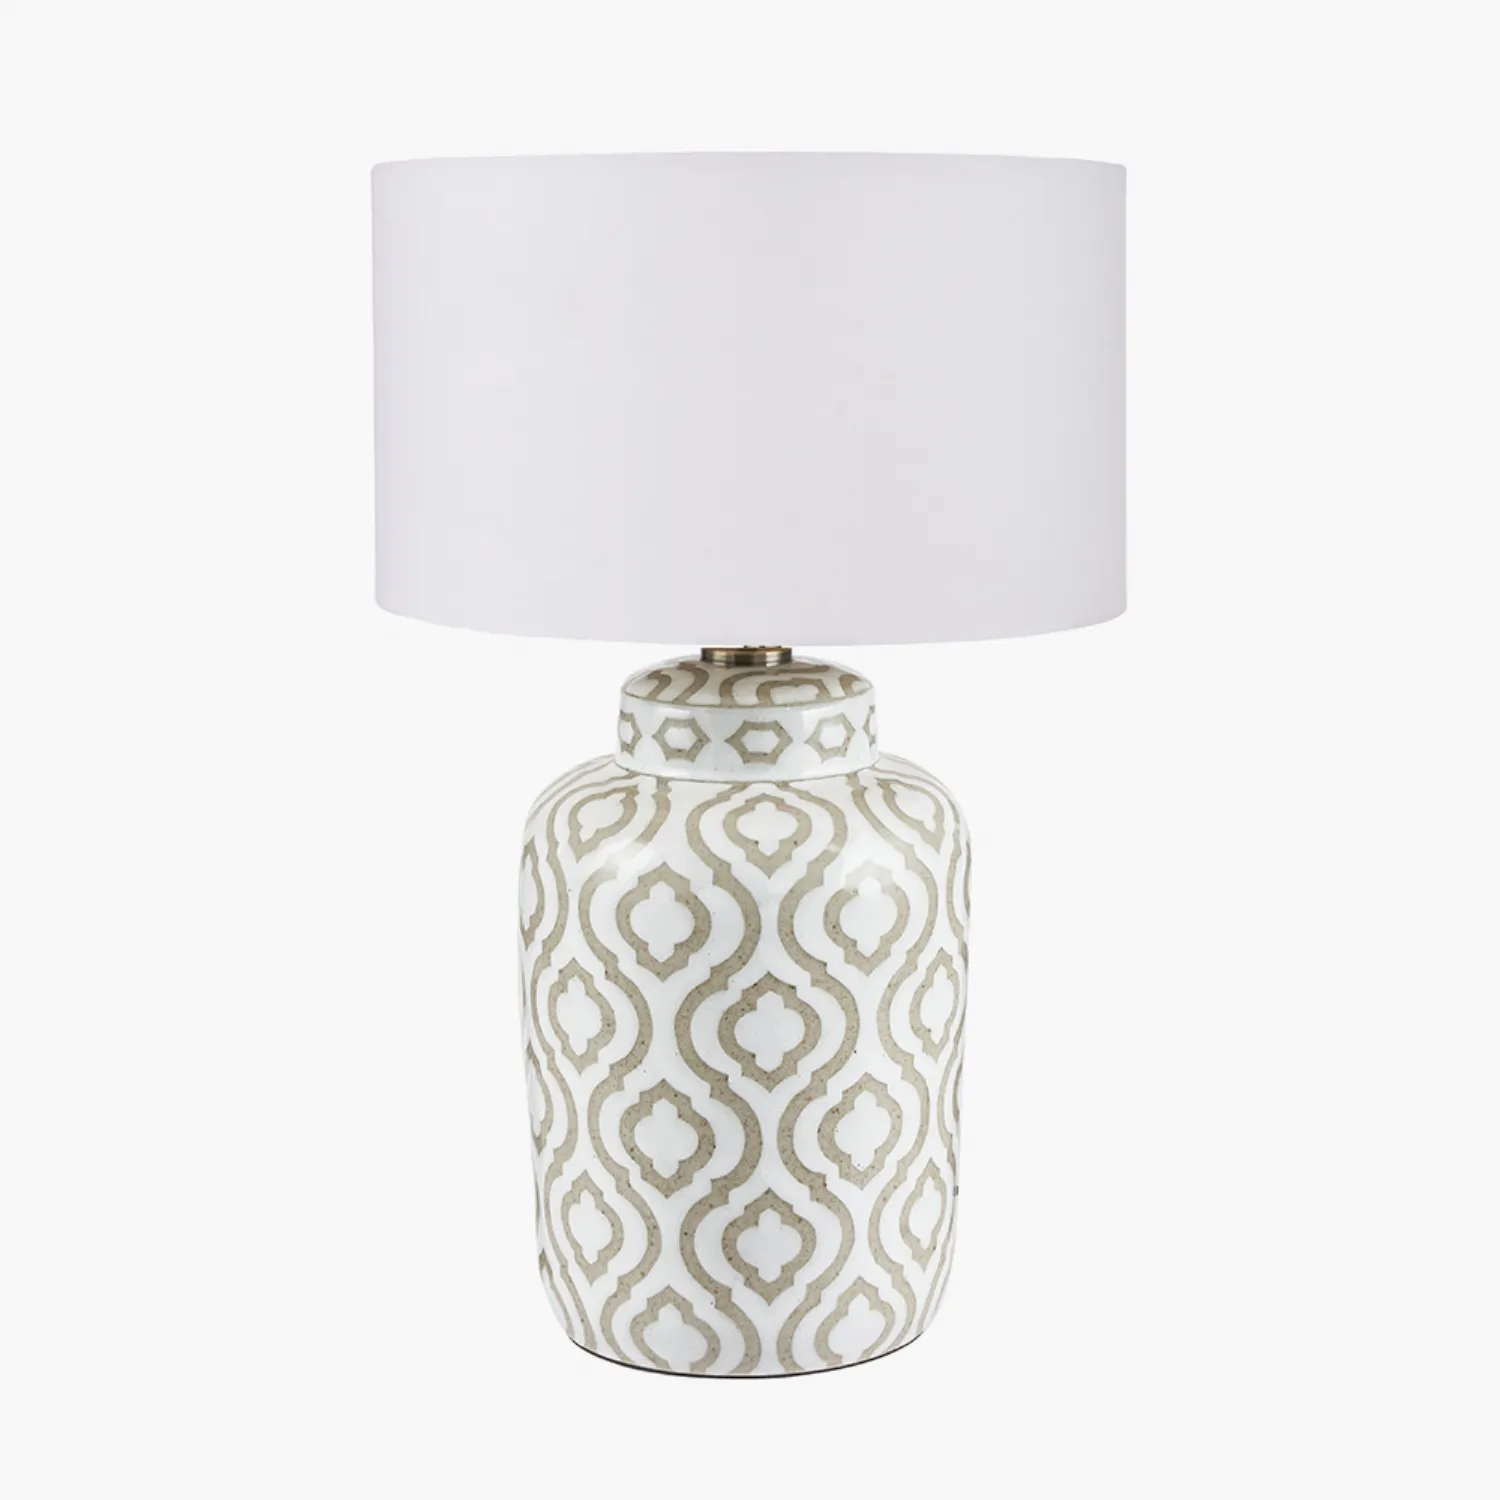 Taupe and White Patterned Ceramic Table Desk Lamp